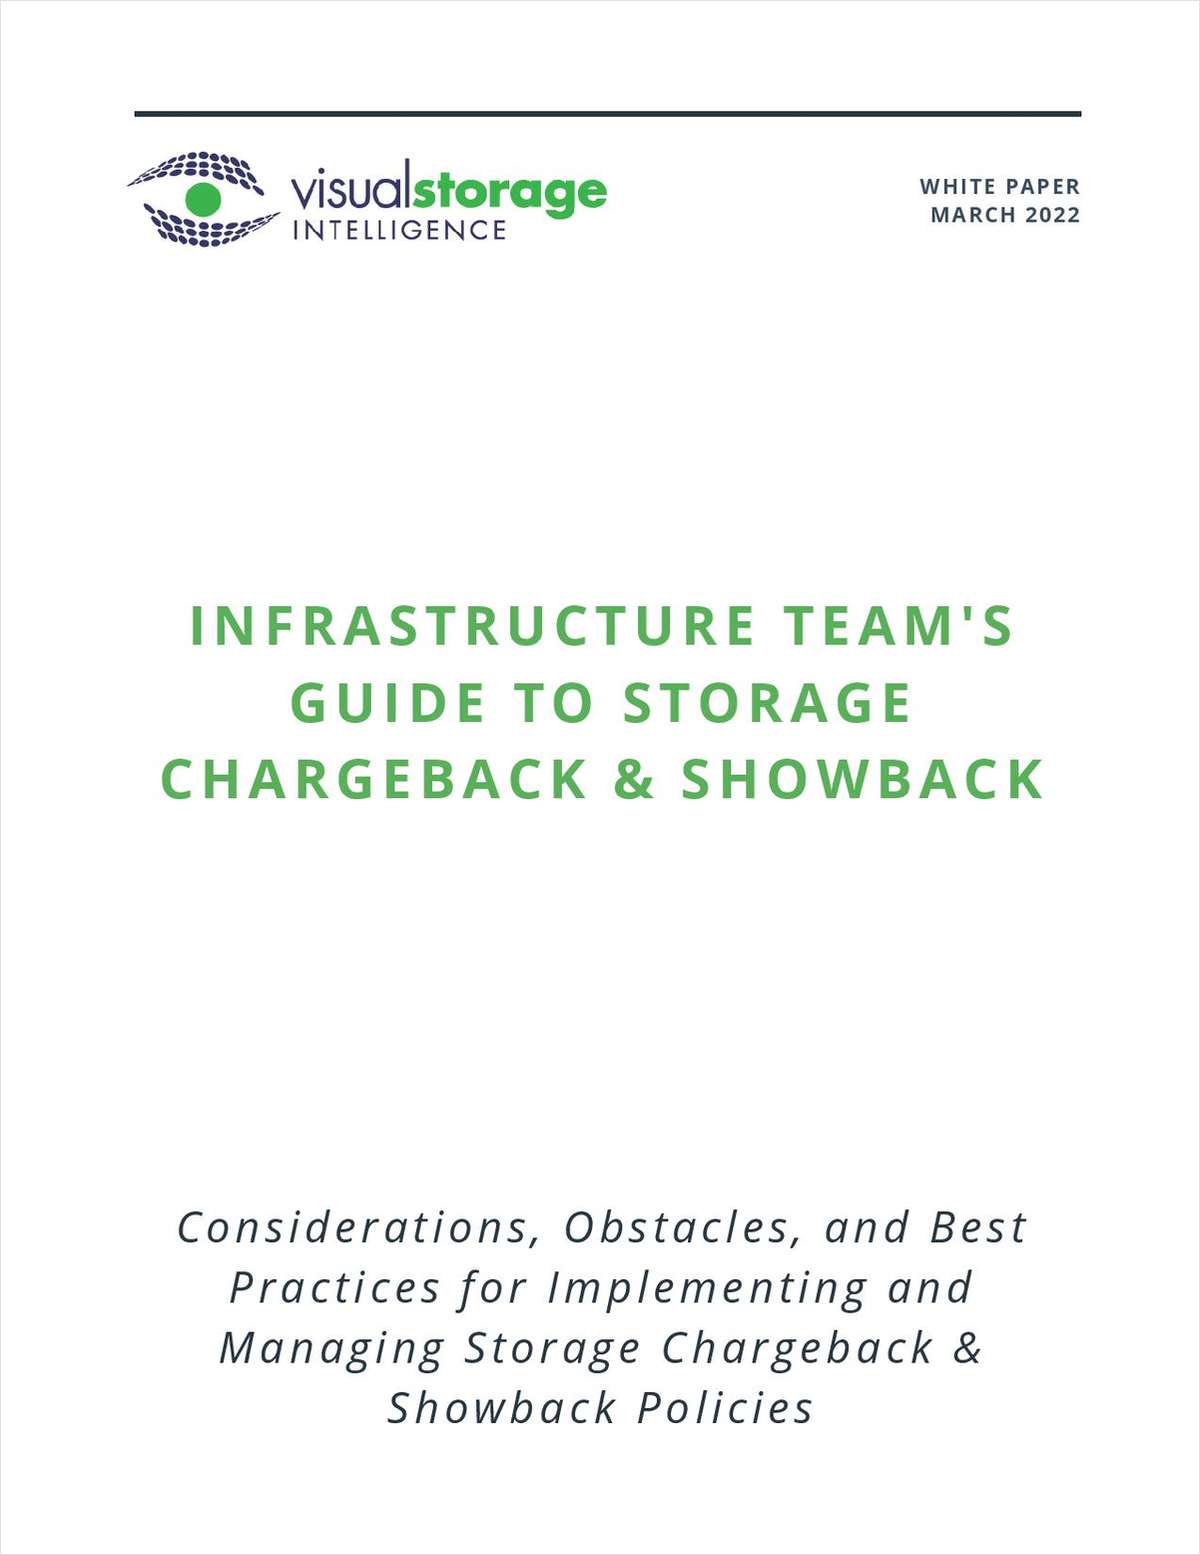 Infrastructure Team's Guide to Storage Chargeback & Showback